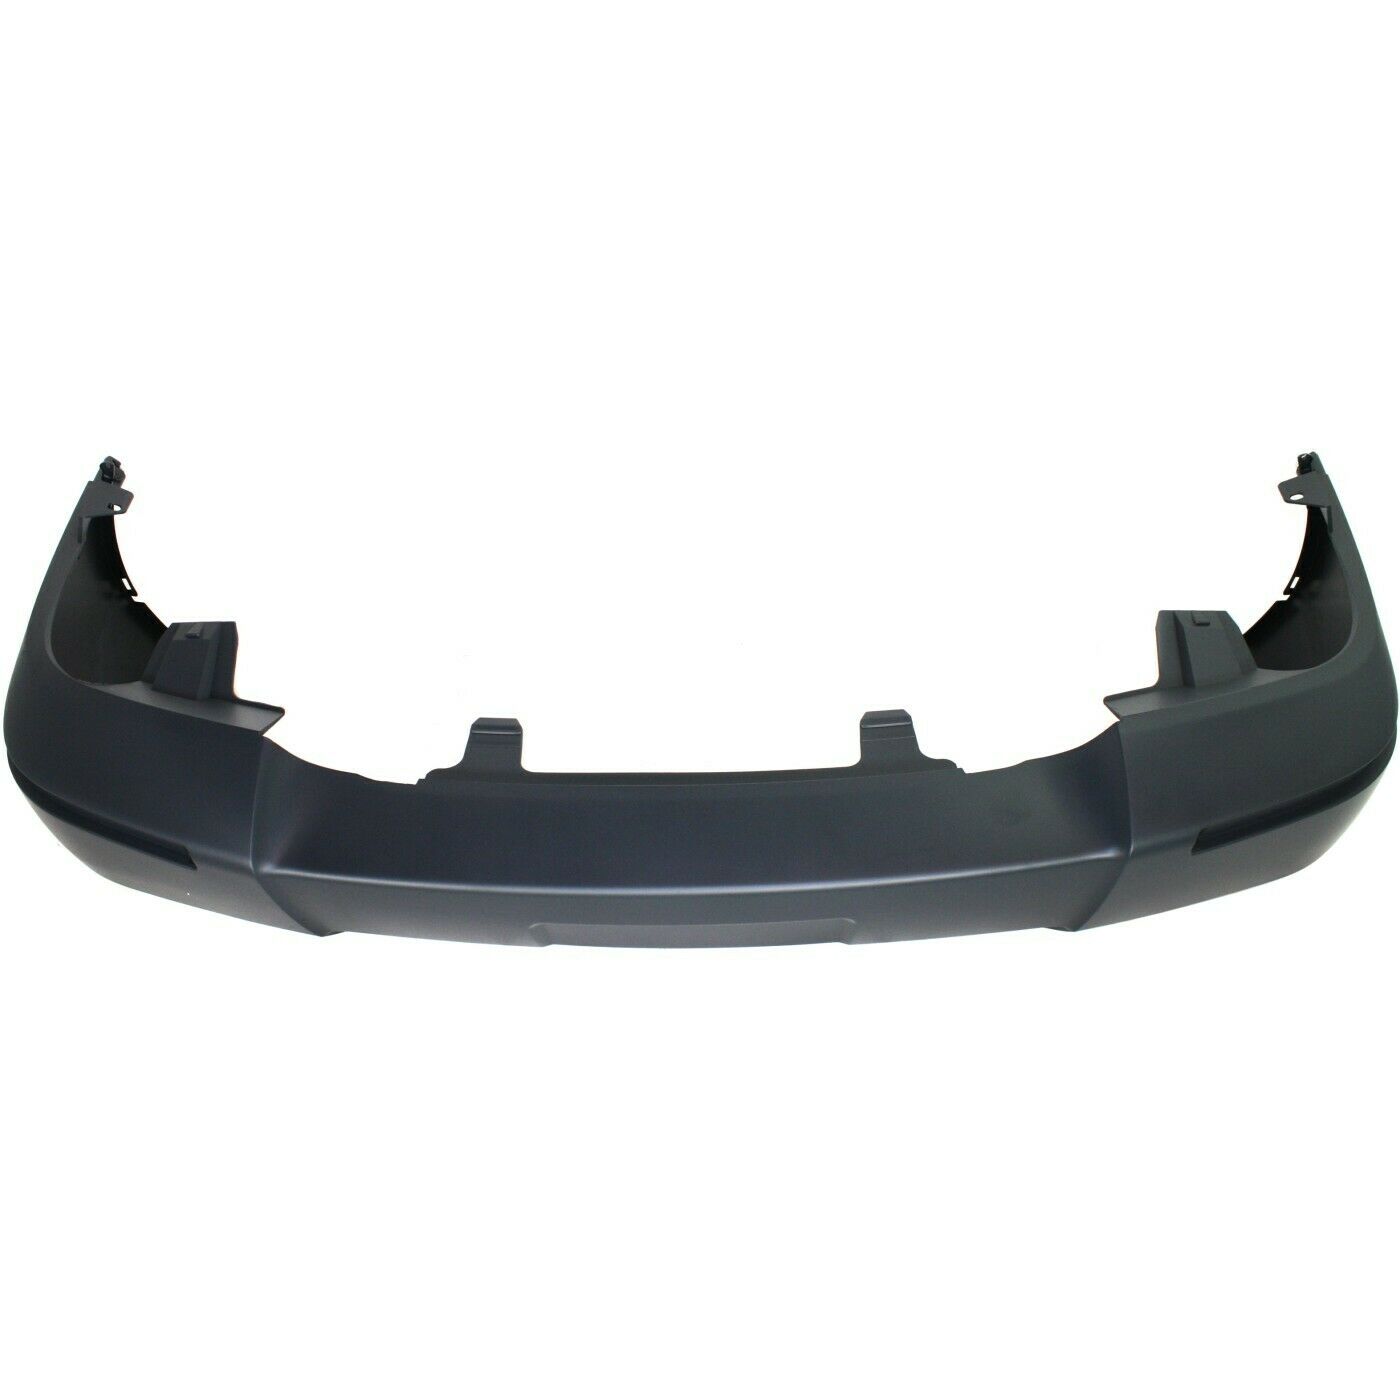 New Bumper Cover Primed With Fog Light Holes Front Side Fits Mercury Grand Marquis 2006-2011 2006 Mercury Grand Marquis Front Bumper Cover